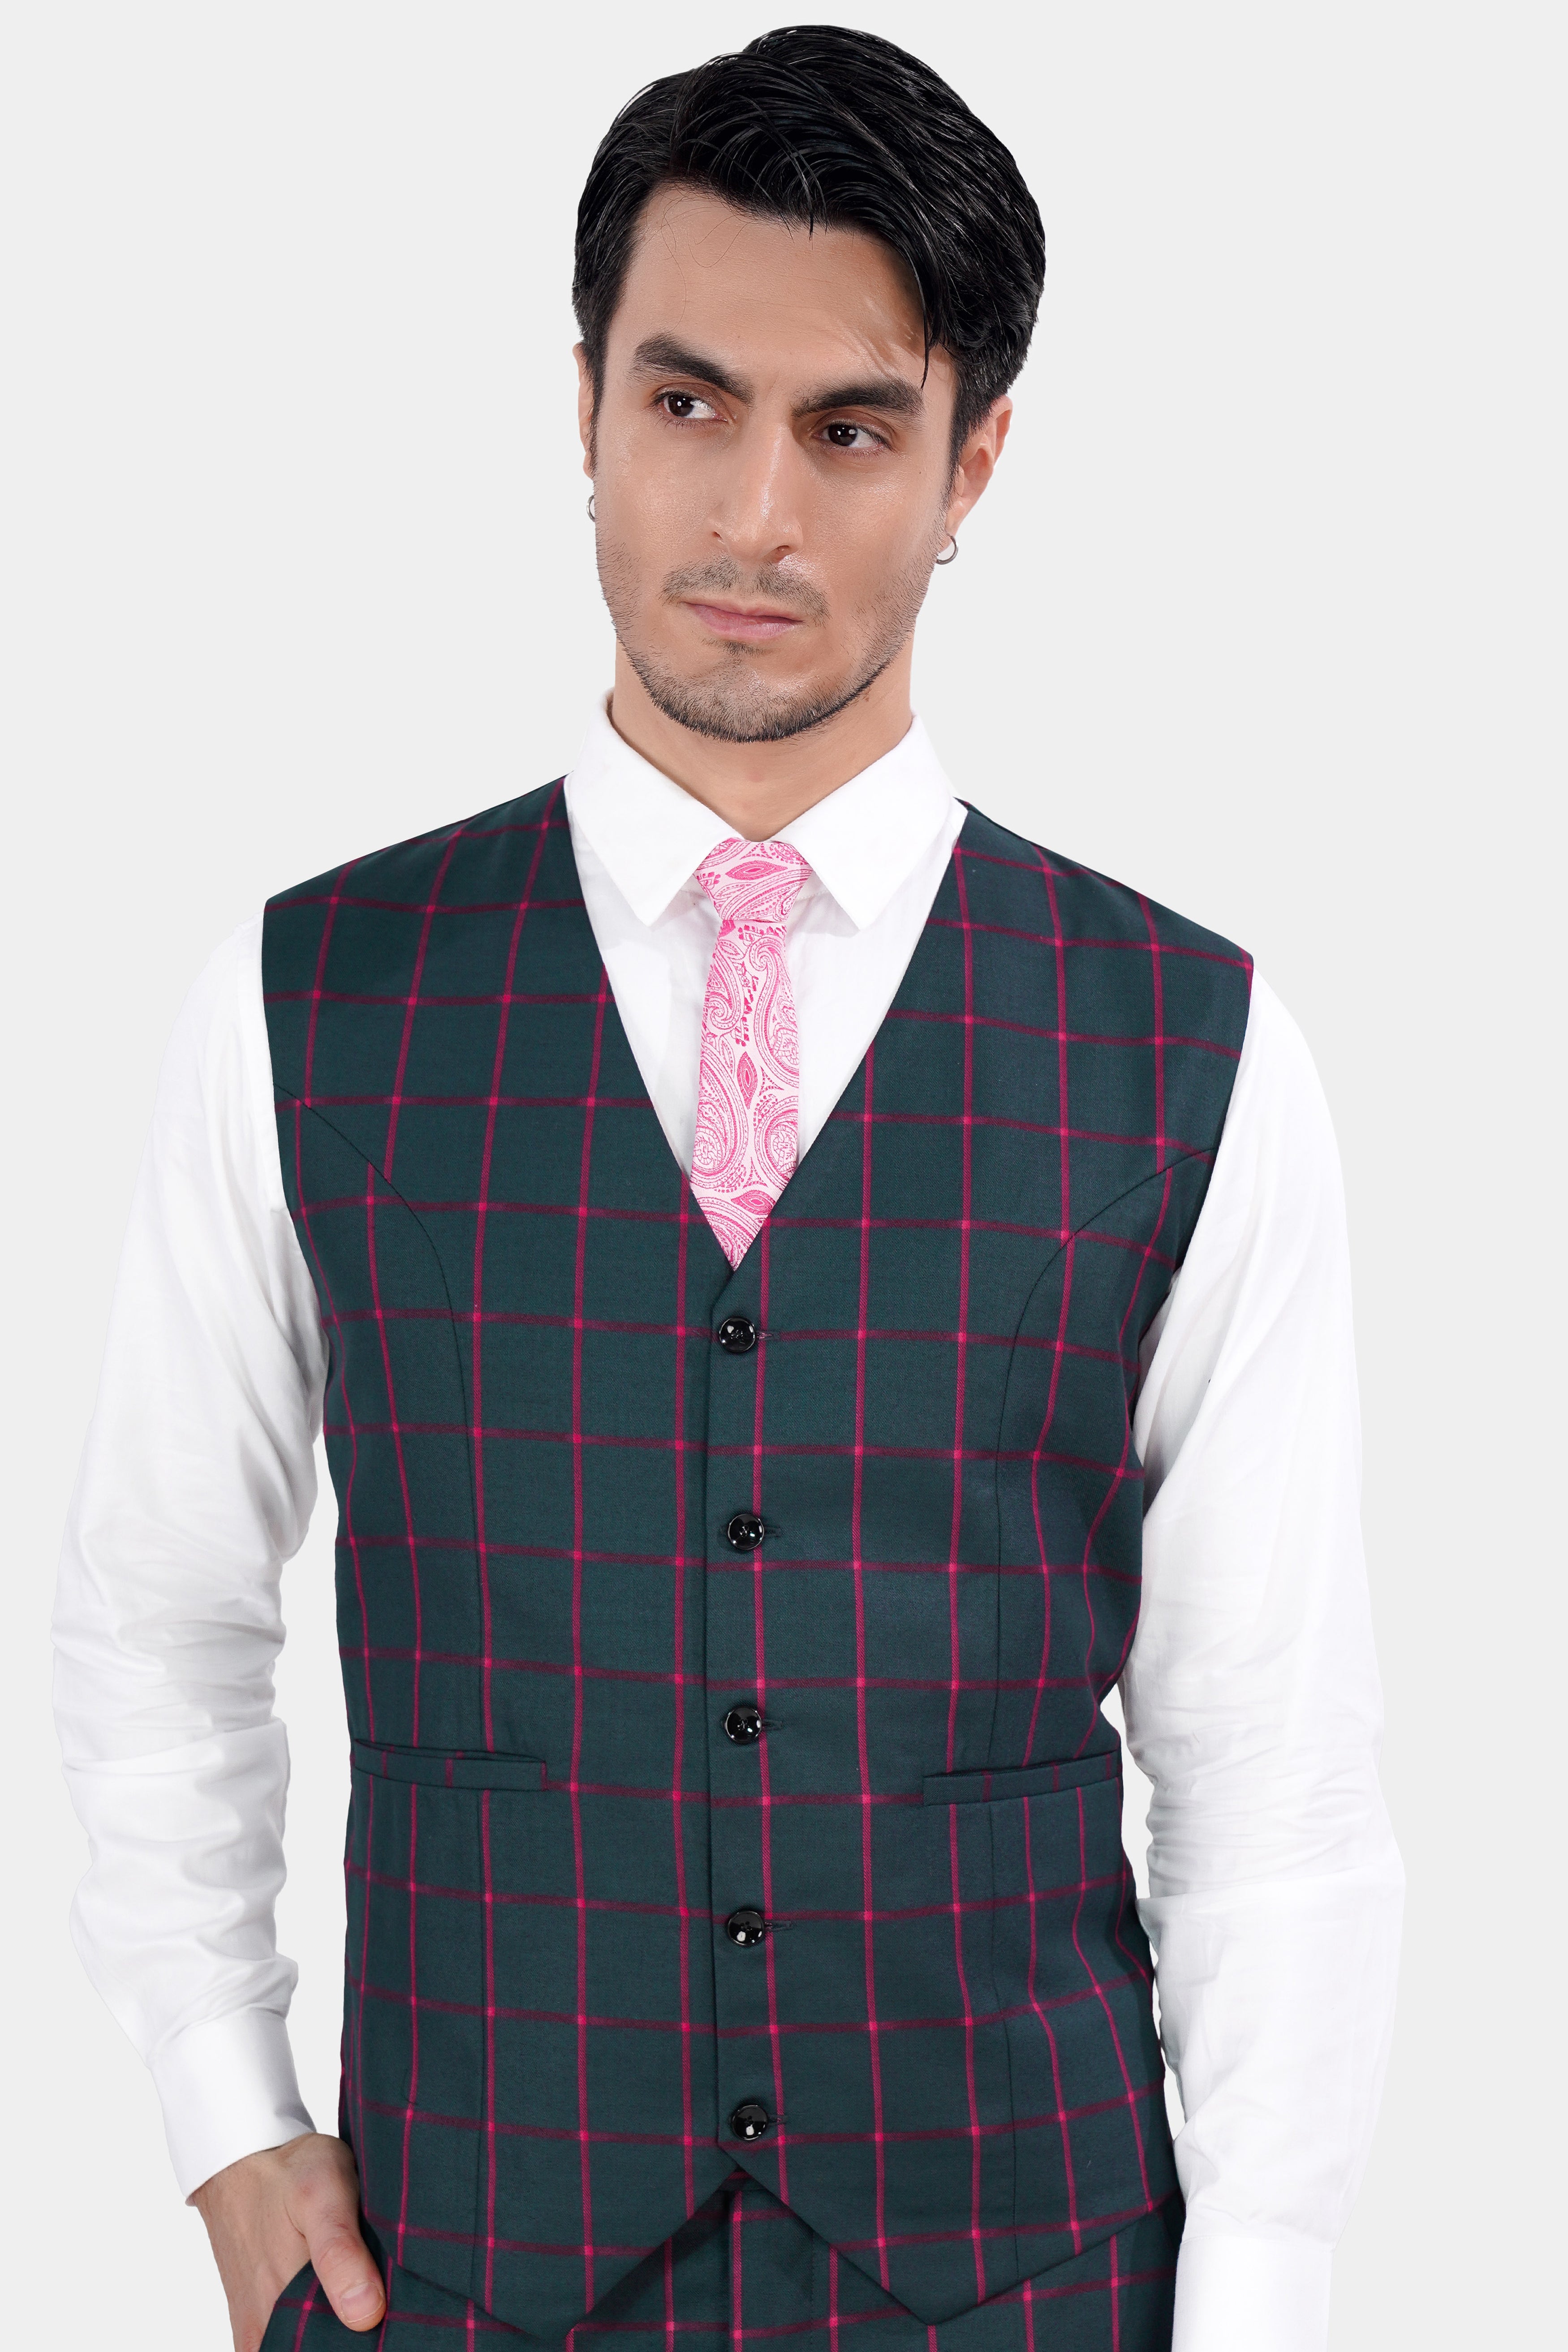 Outer Space Gray and Rouge Pink Windowpane Wool Rich Waistcoat V2843-36, V2843-38, V2843-40, V2843-42, V2843-44, V2843-46, V2843-48, V2843-50, V2843-52, V2843-54, V2843-56, V2843-58, V2843-60